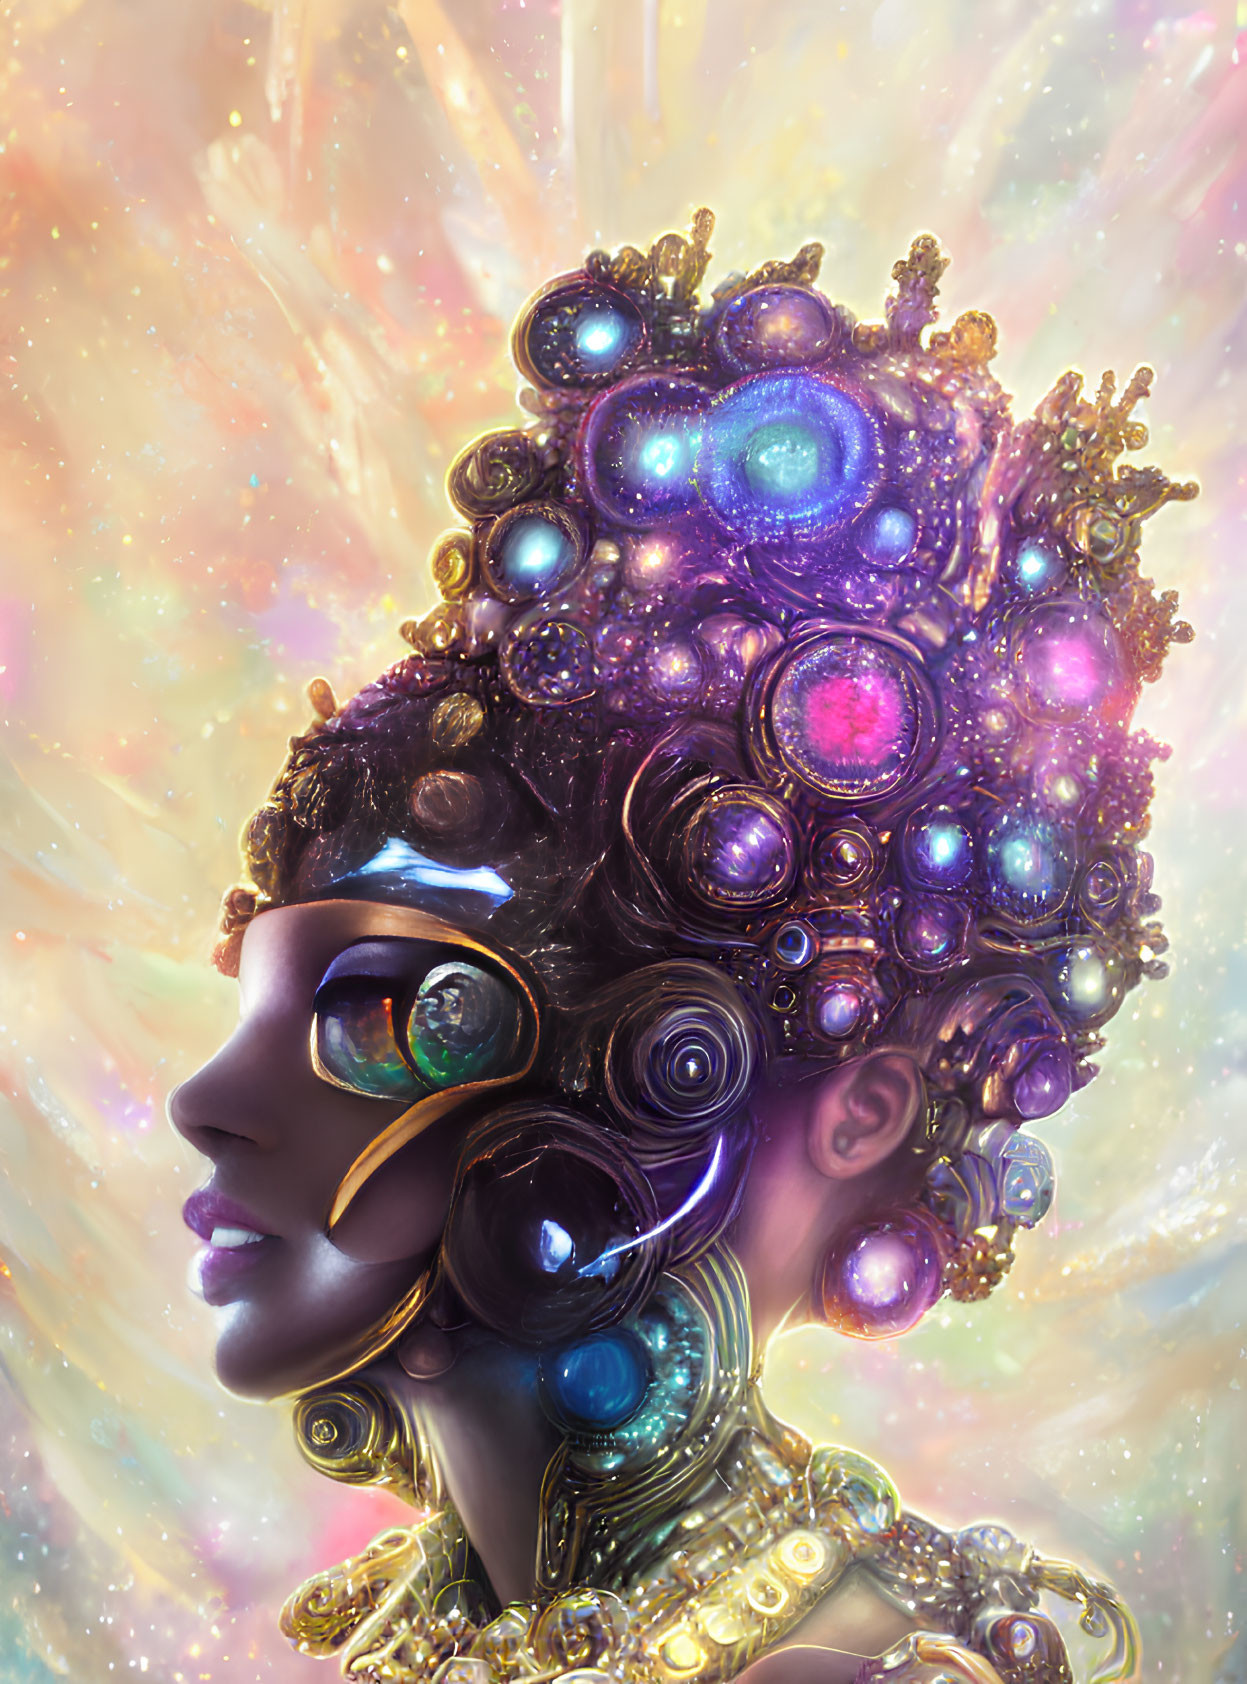 Cosmic-themed digital artwork of a woman with glowing orbs